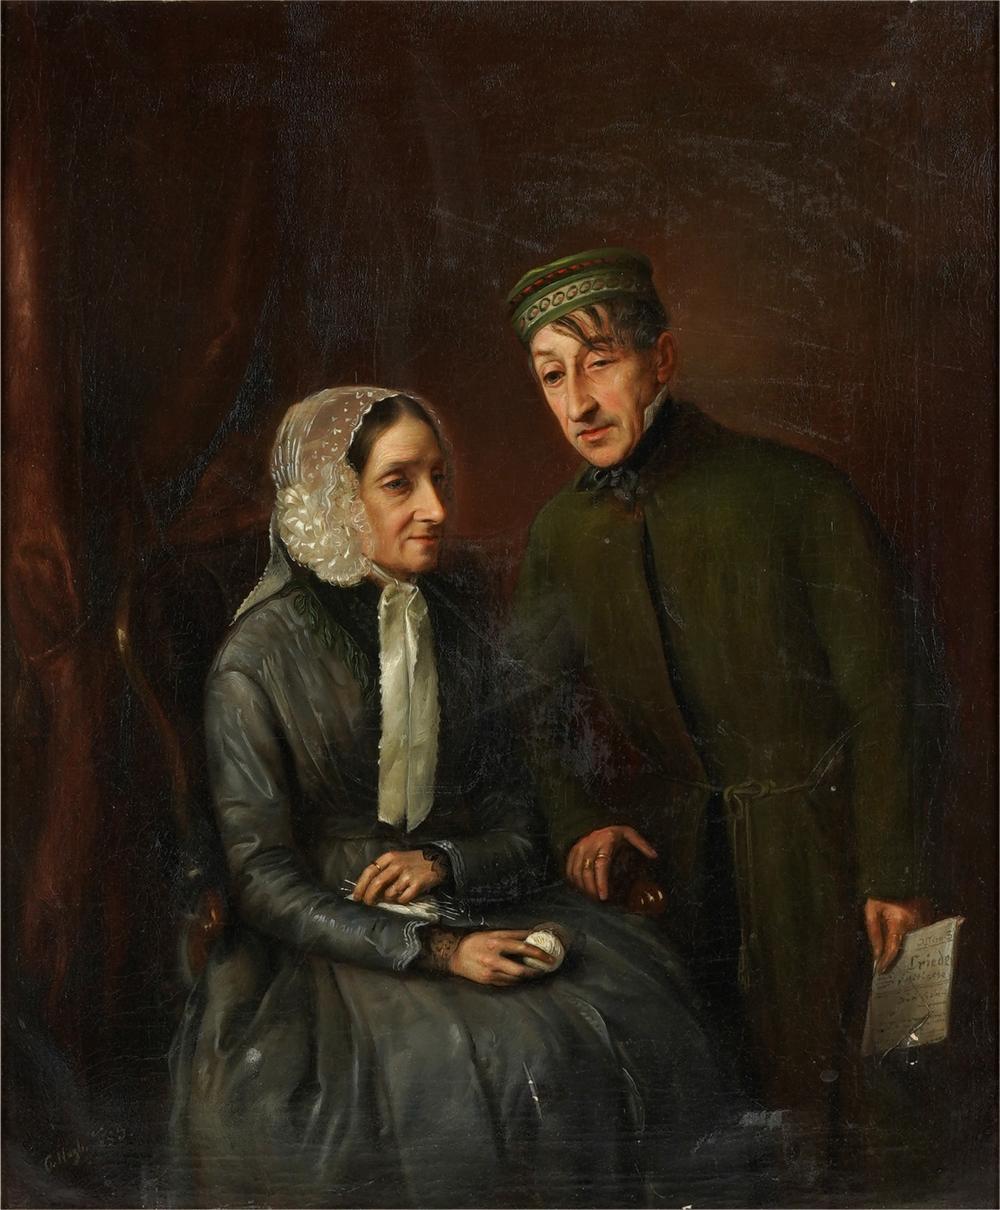 19TH CENTURY: MAN WITH SEATED WOMAN1853;